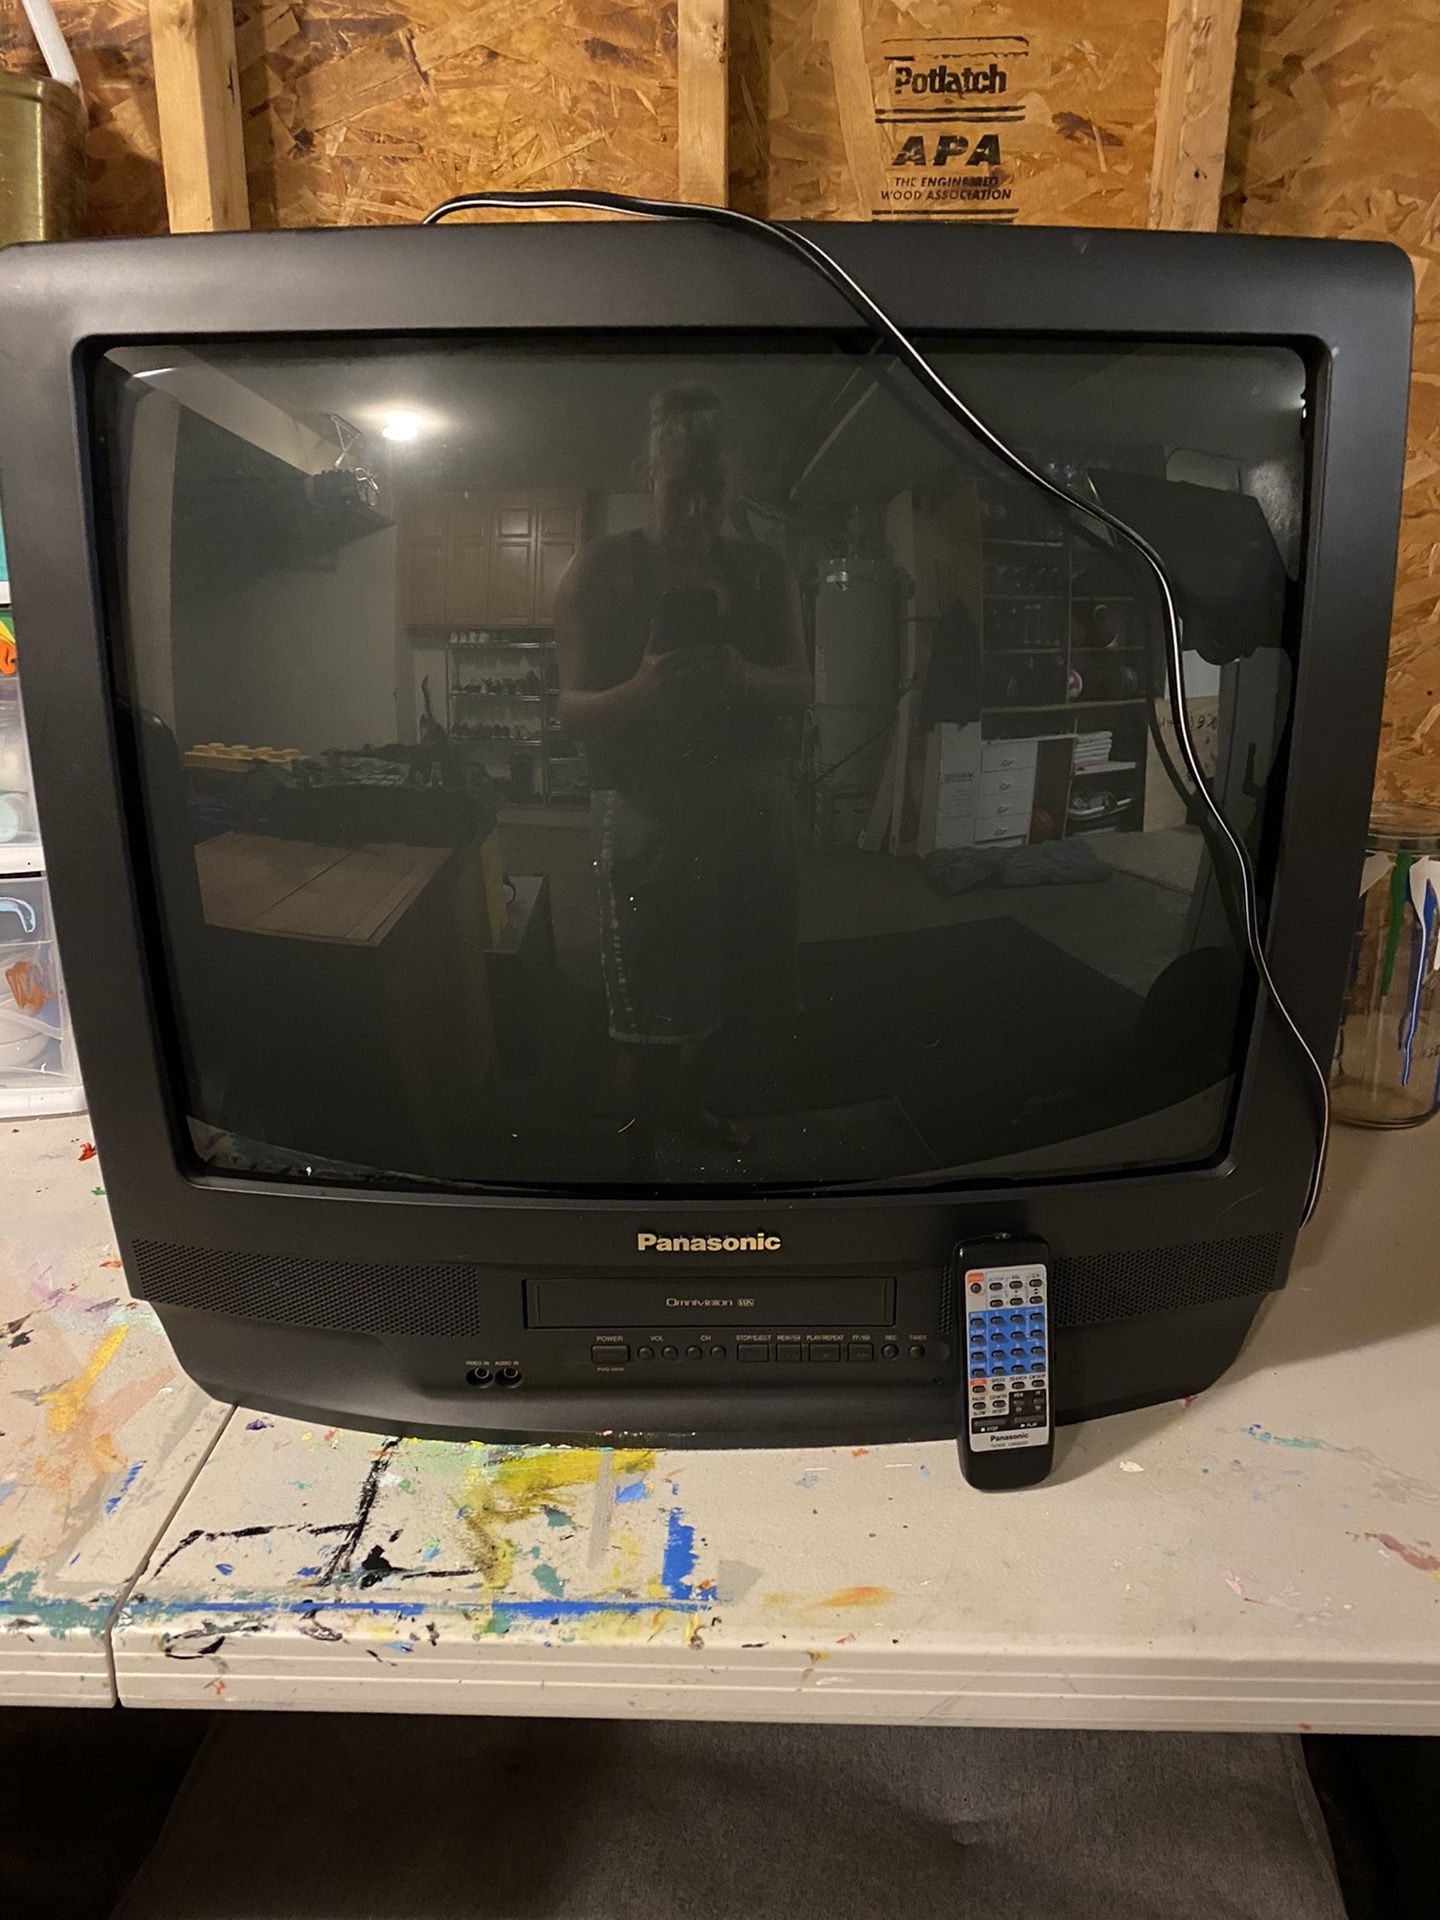 Panasonic TV With built-in VCR